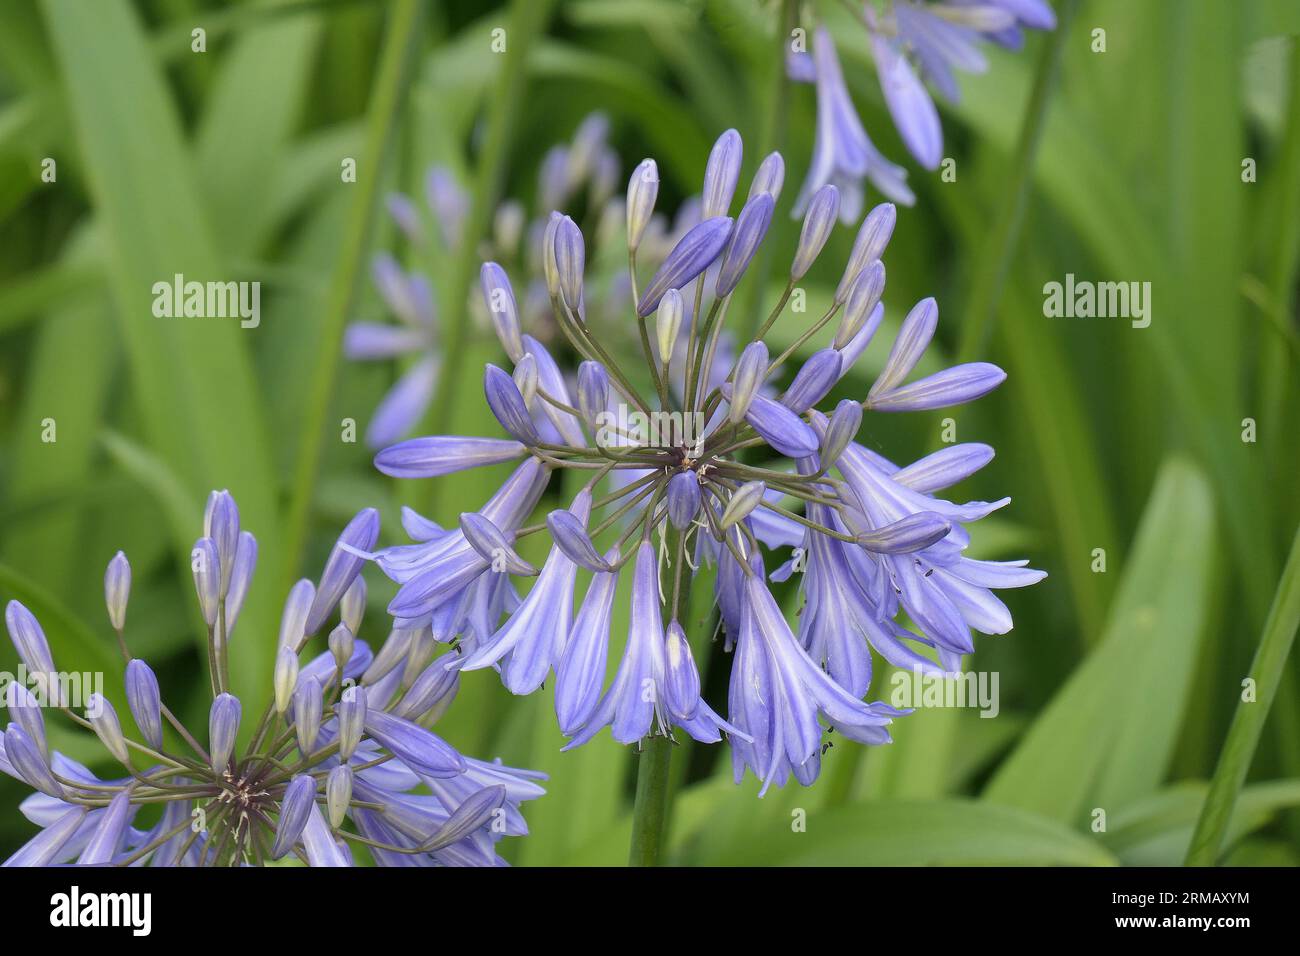 Closeup of the sky blue flowers of the herbaceous perennial summer flowering garden plant agapanthus inapertus subsp. hollandii sky or African lily. Stock Photo